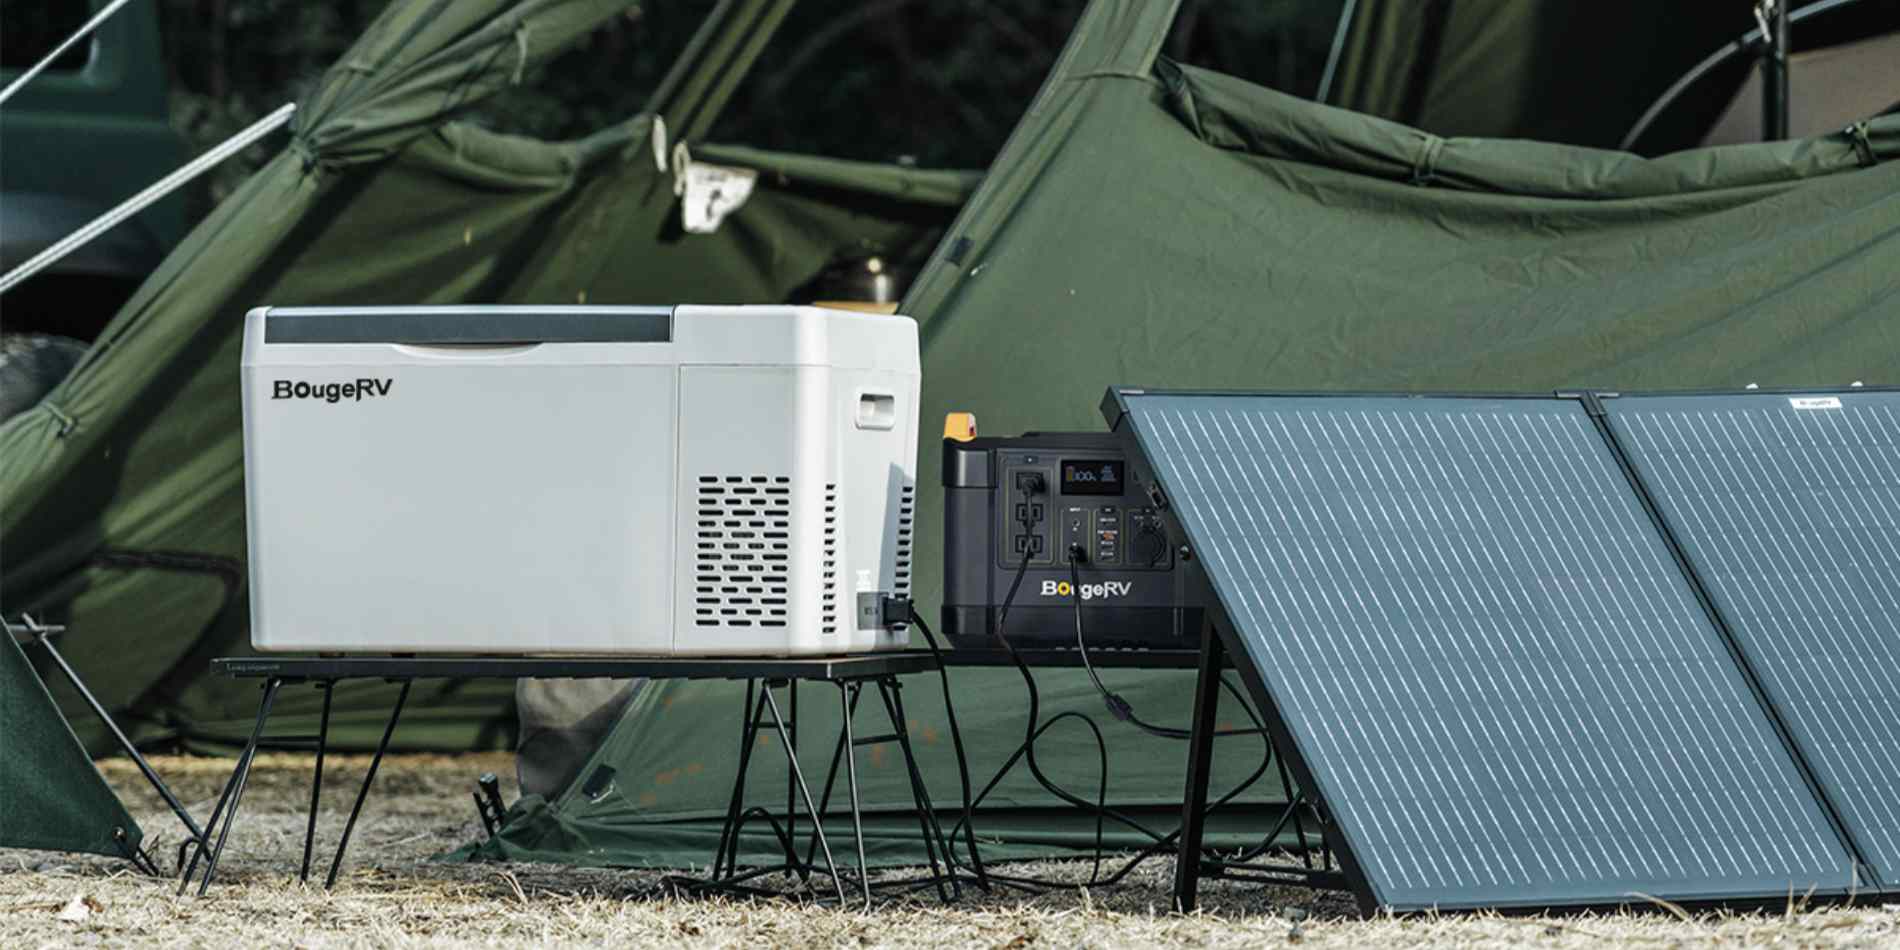 BougeRV’s Compact 12v Mini Fridge Can Run on BougeRV’s Portable Power Stations and Portable Solar Panels for Camping